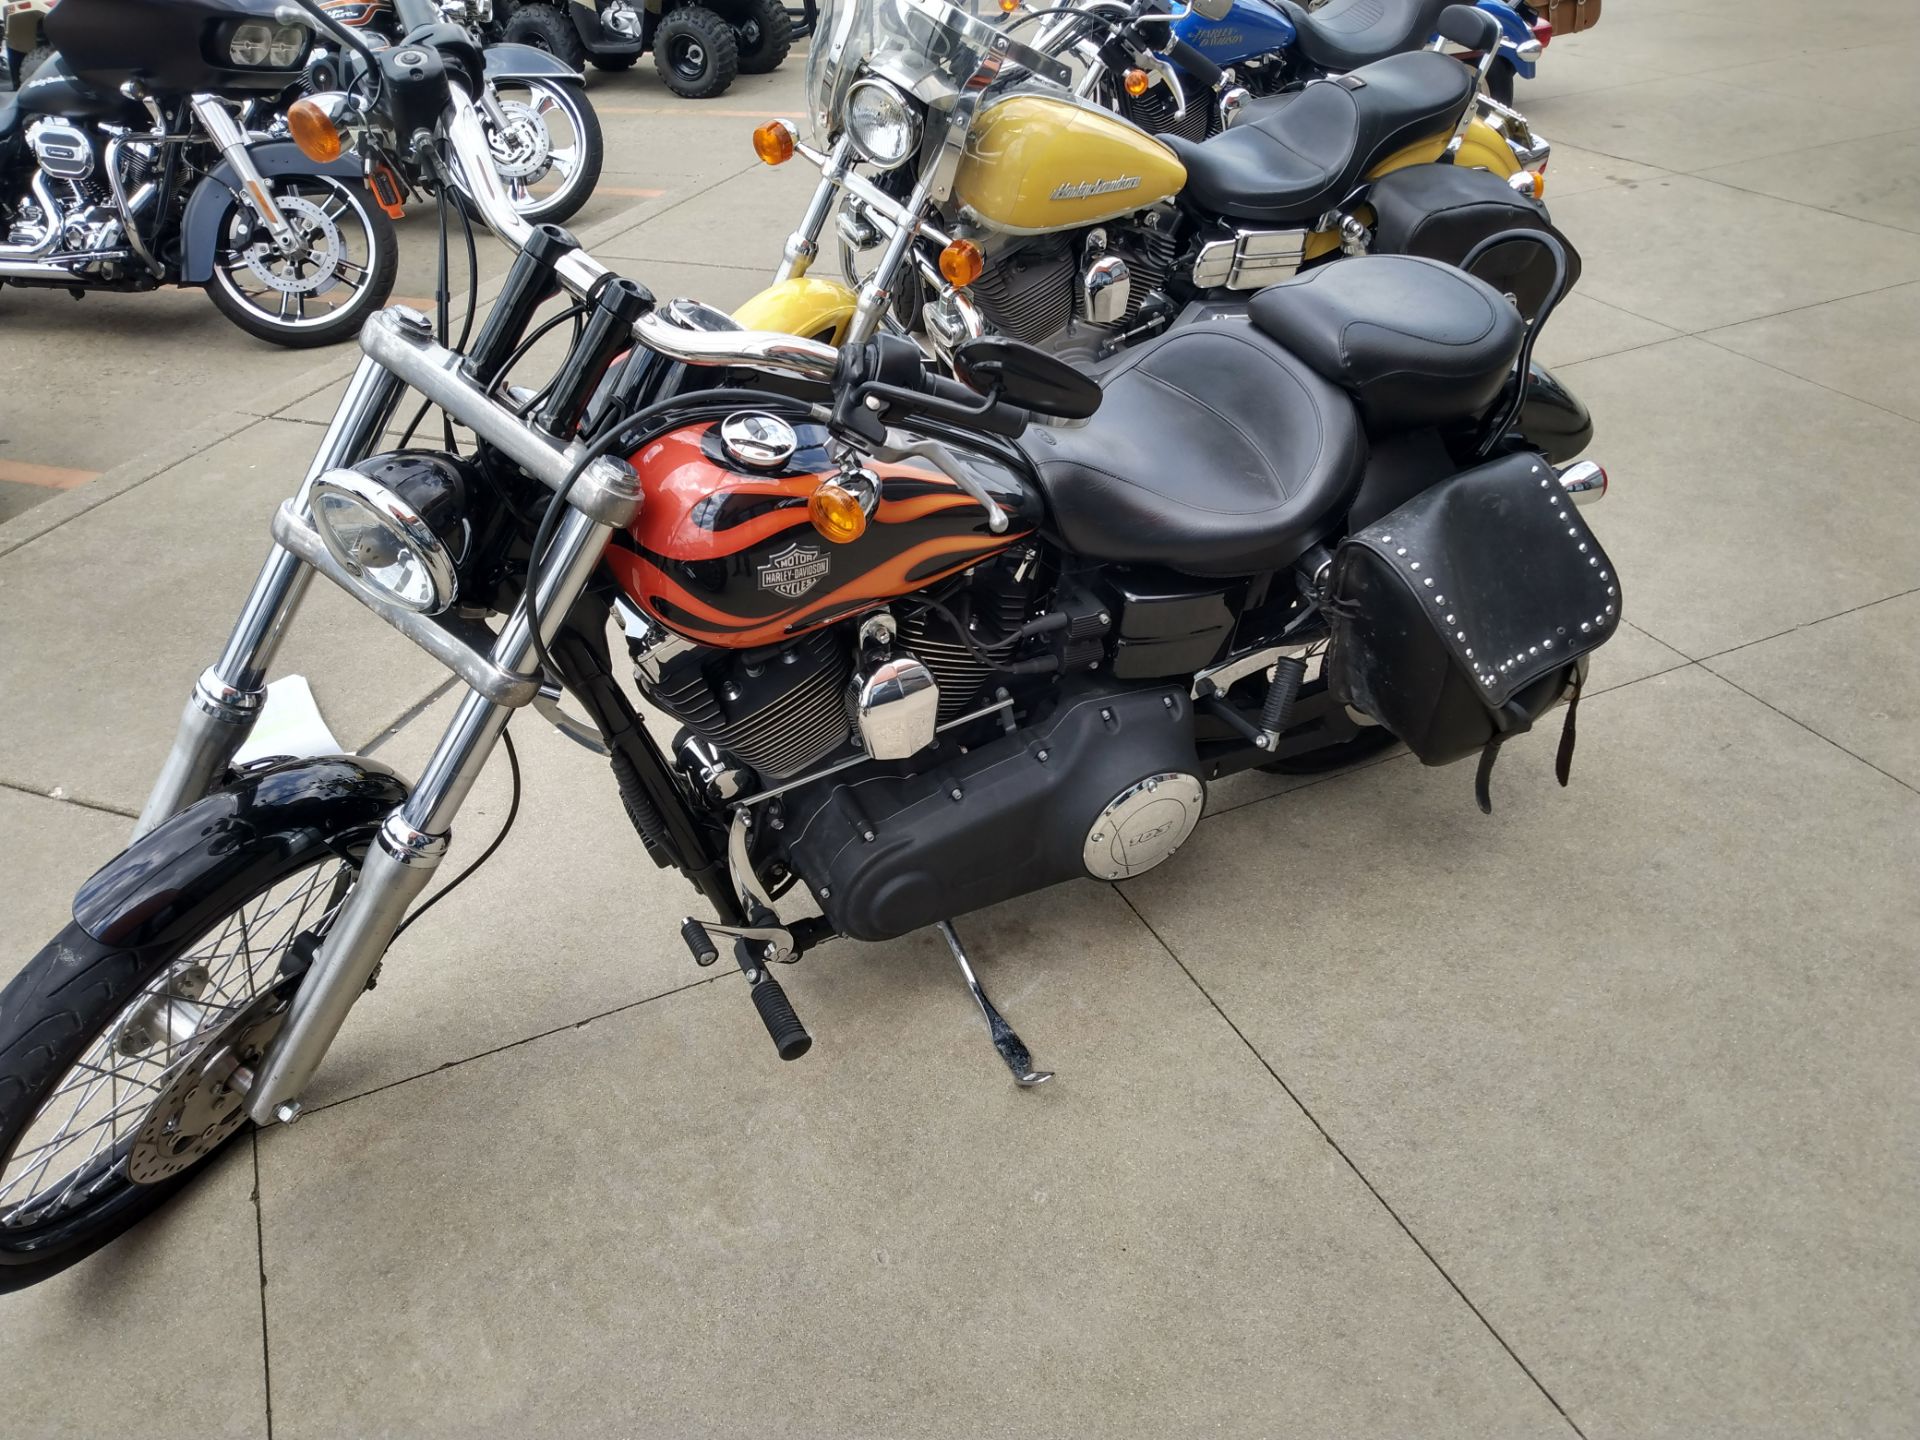 2012 Harley-Davidson FXDWG103 in Marion, Illinois - Photo 4